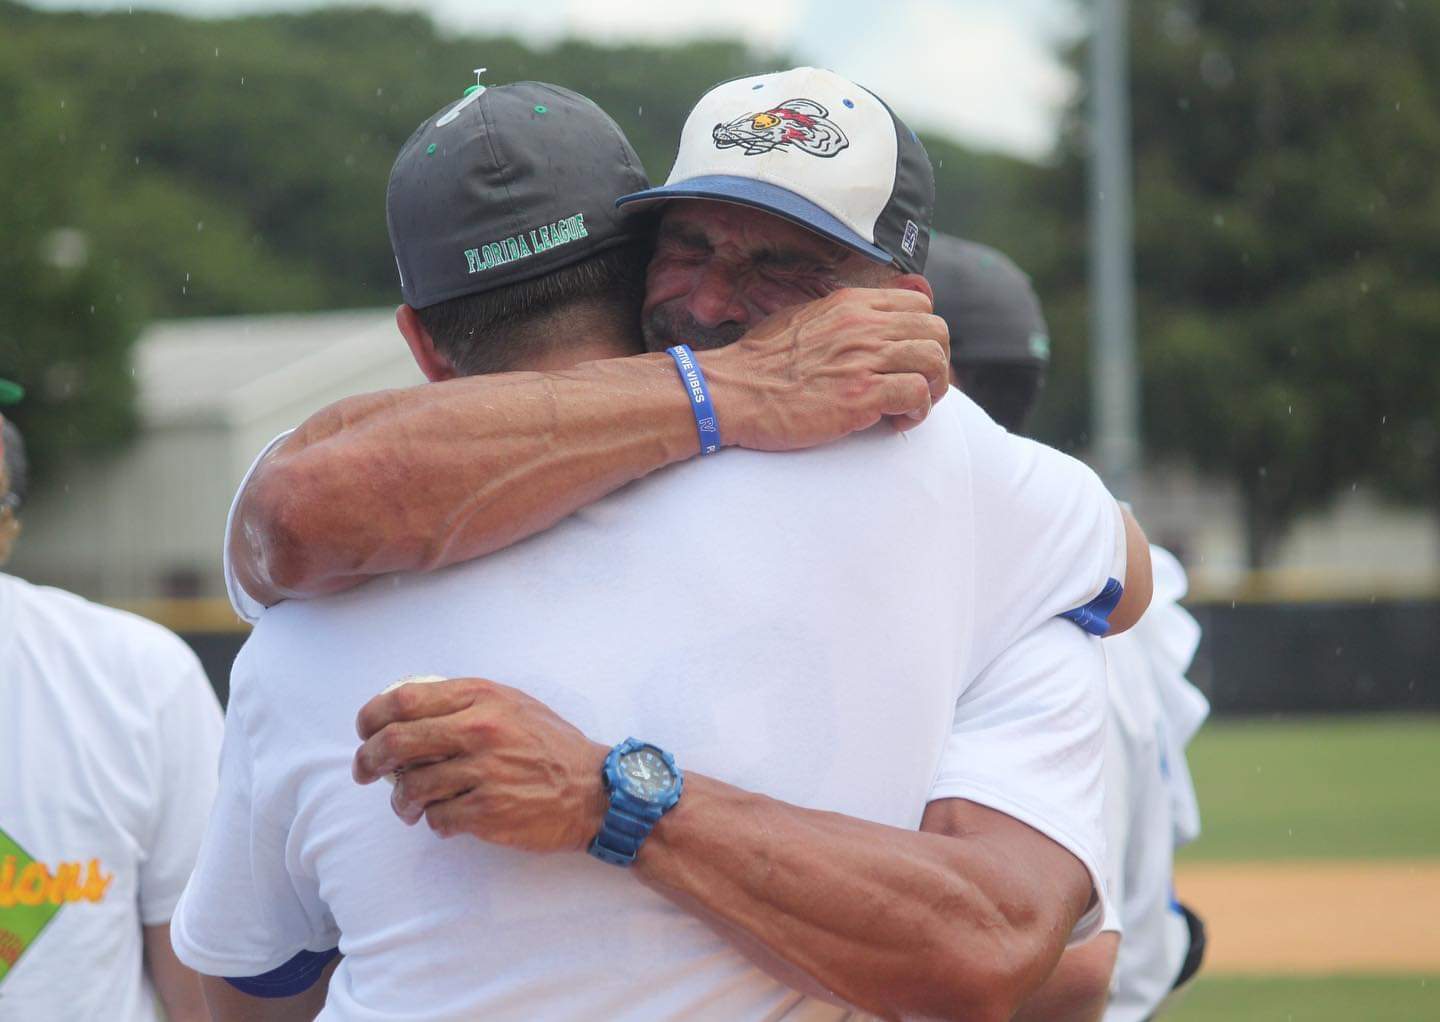 Coach Josh Montero had a lot of great coaches growing up. He said he wanted to give back to his team like his coaches gave back to him. Courtesy photo